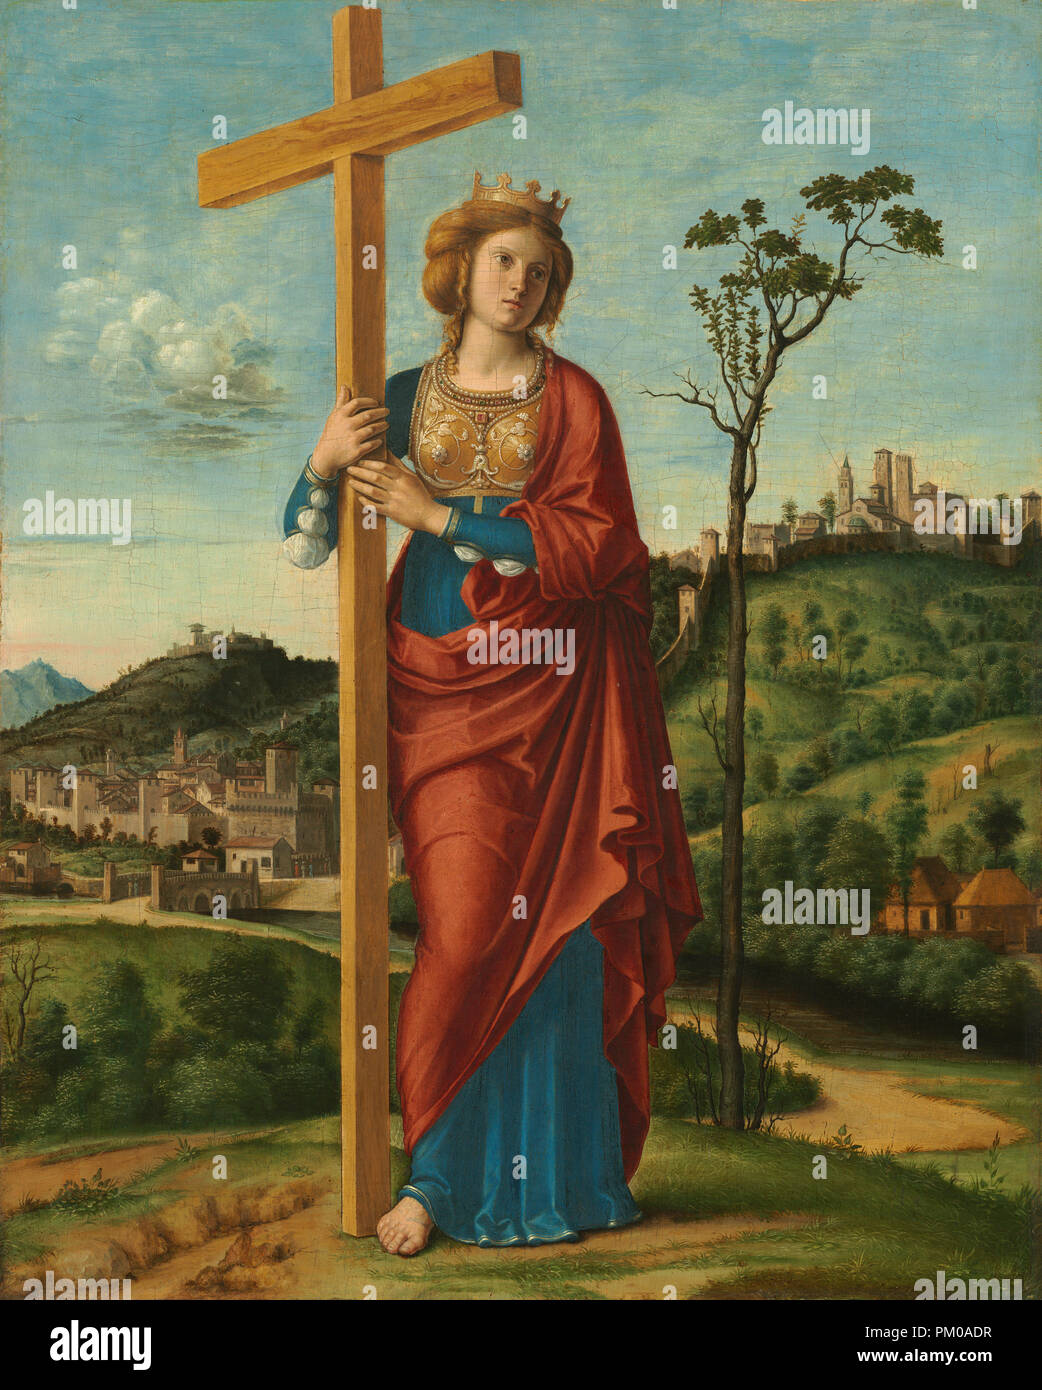 Saint Helena. Dated: c. 1495. Dimensions: overall: 40.2 x 32.2 cm (15 13/16 x 12 11/16 in.)  framed: 61 x 53.3 x 6.4 cm (24 x 21 x 2 1/2 in.). Medium: oil on panel. Museum: National Gallery of Art, Washington DC. Author: CIMA DA CONEGLIANO. Stock Photo